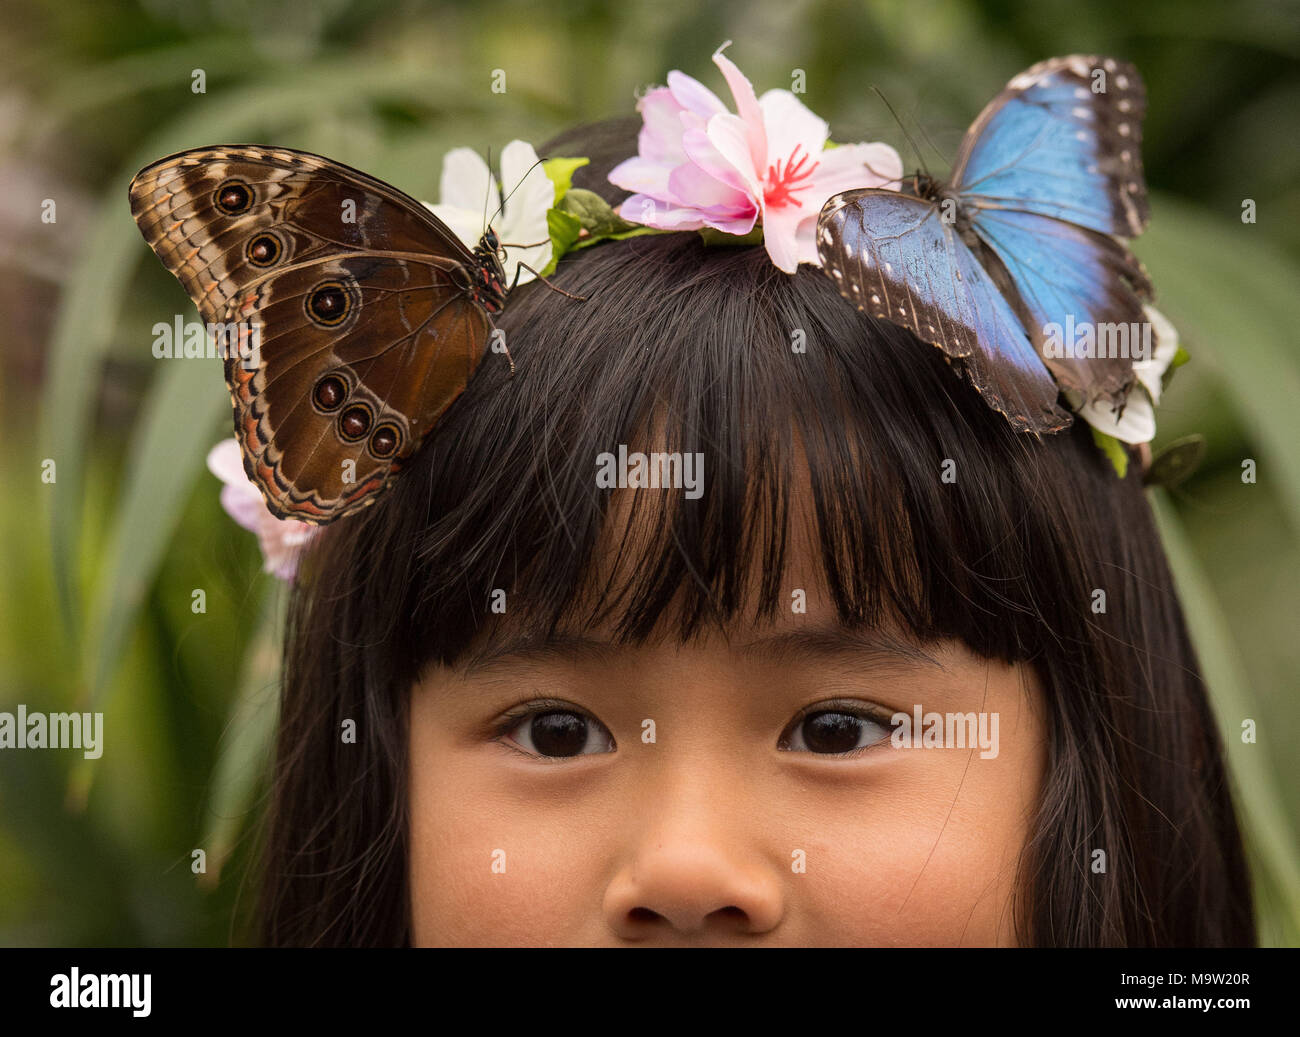 A visitor looks at two Blue Morpho butterflies in the Sensational Butterflies exhibition, at the Natural History Museum, London, which allows visitors to see hundreds of butterflies from Asia, Africa and the Americas. Stock Photo